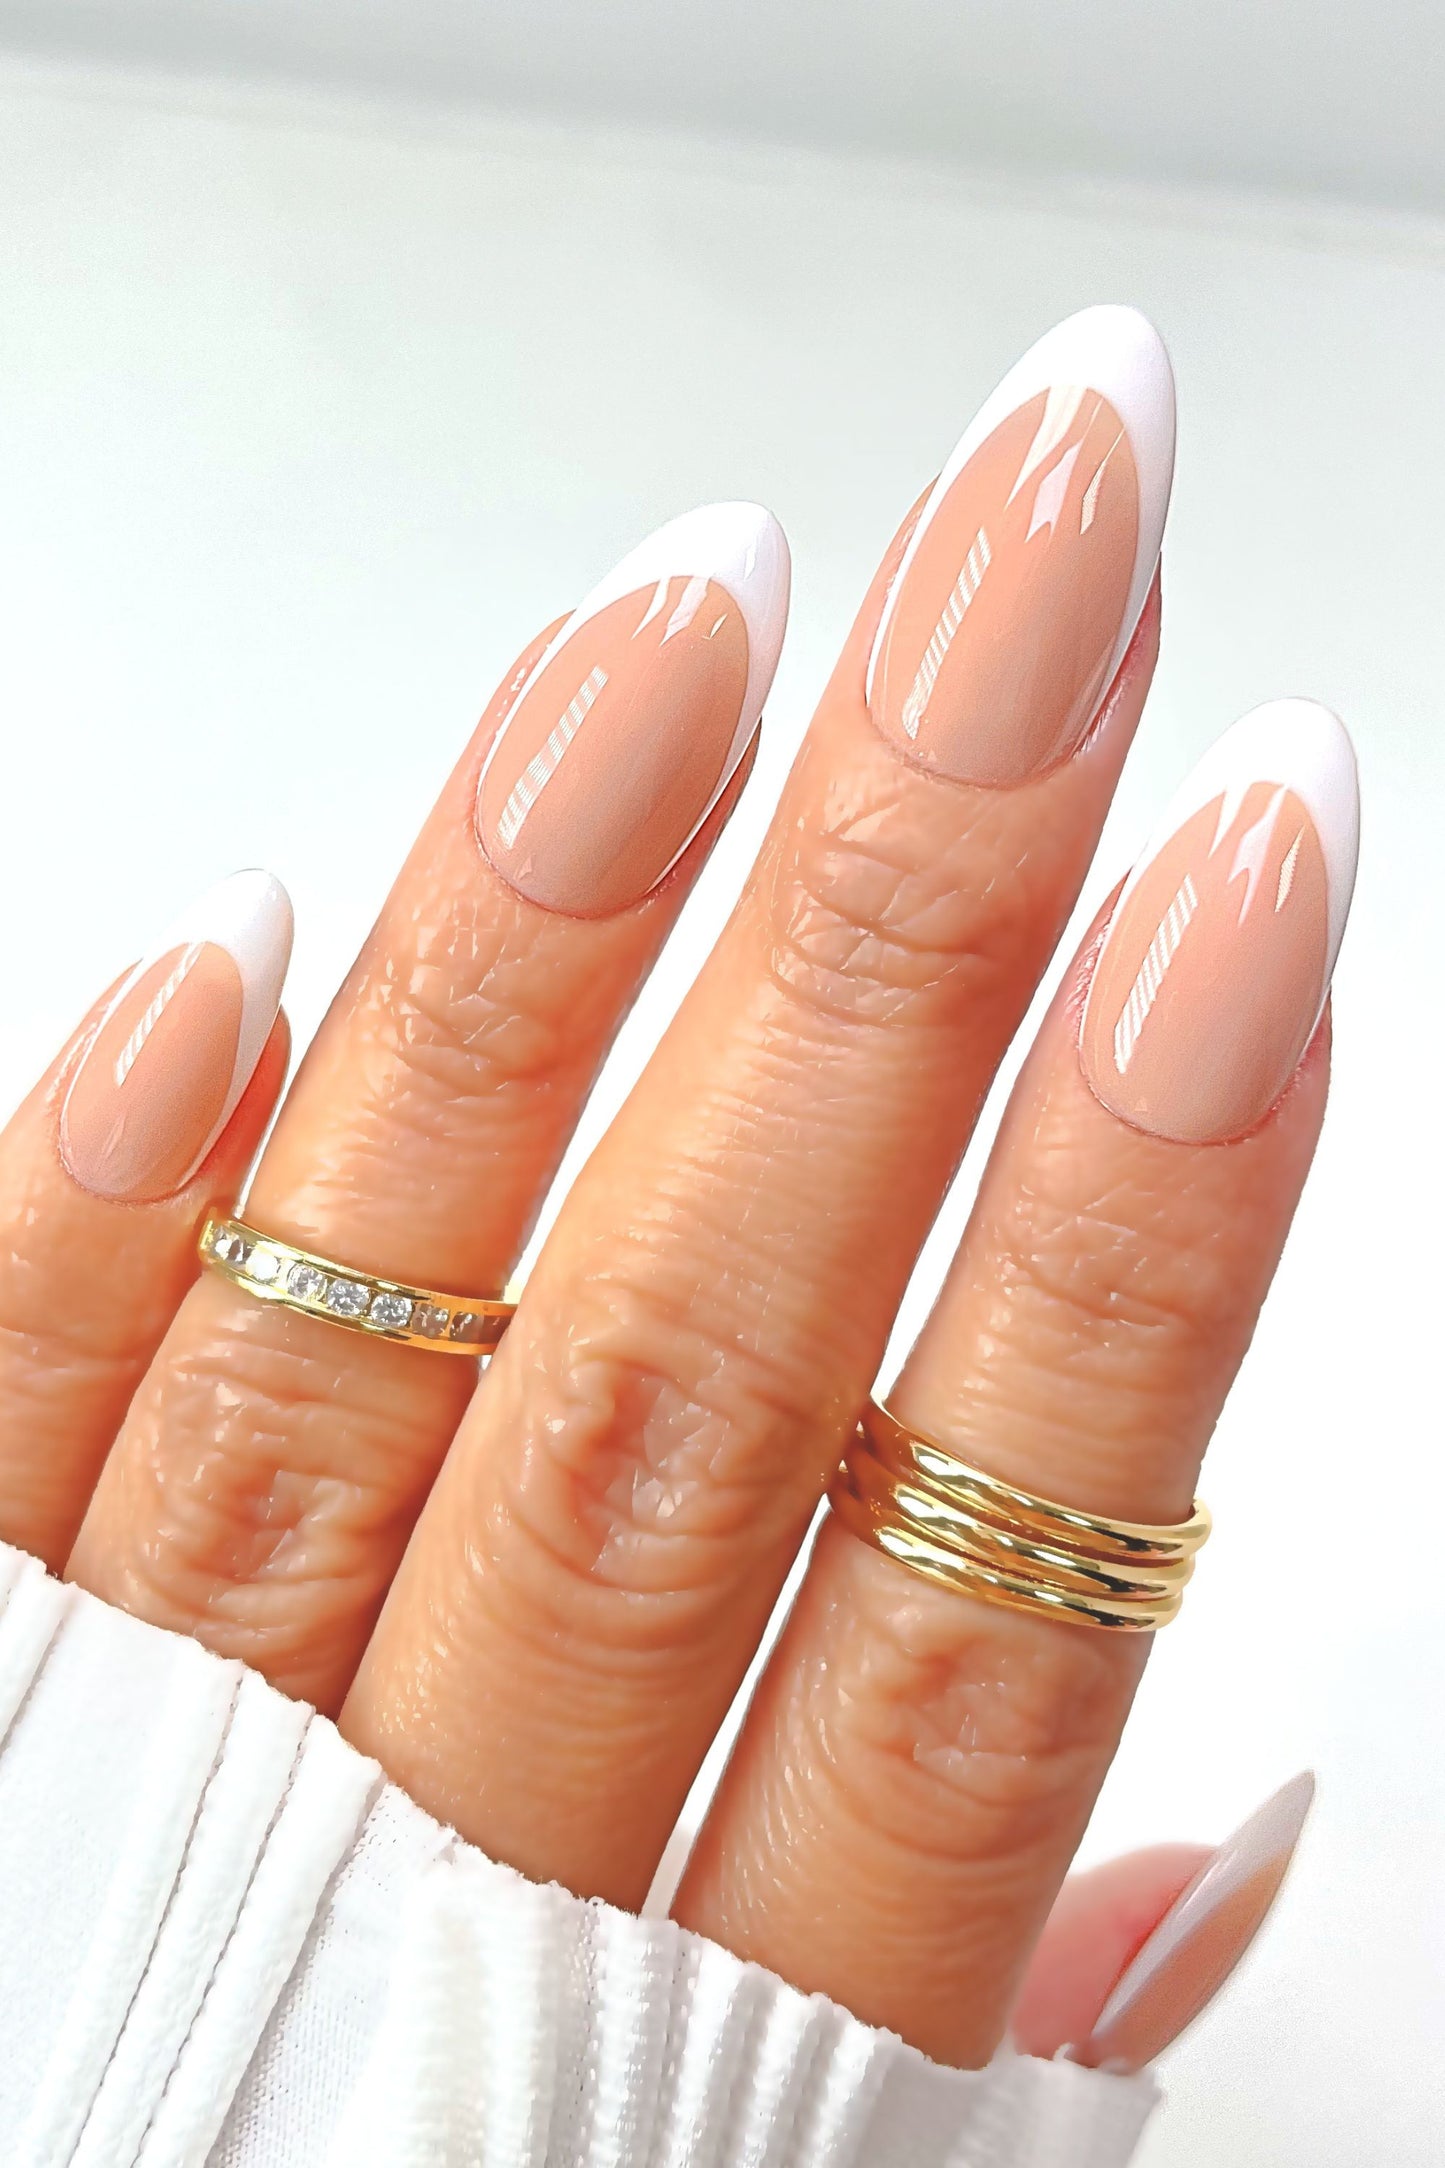 "Classy Luxe" French Manicure Press On Nails Set